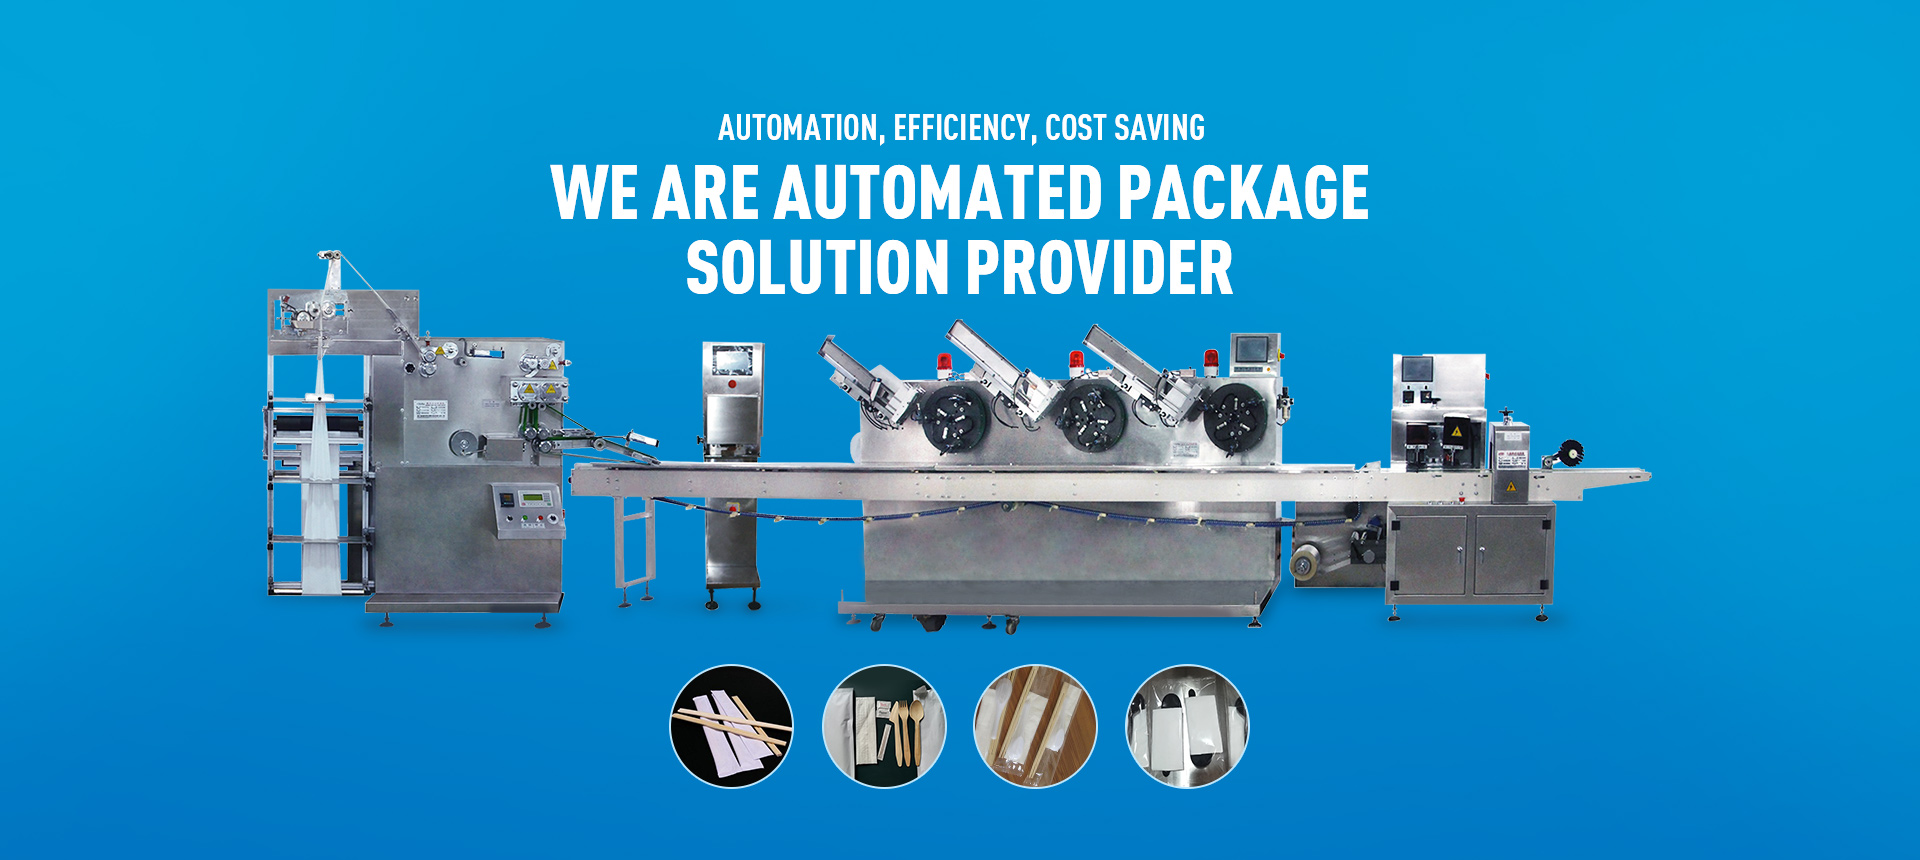 Cutlery wrapping machine | Lead Machinery